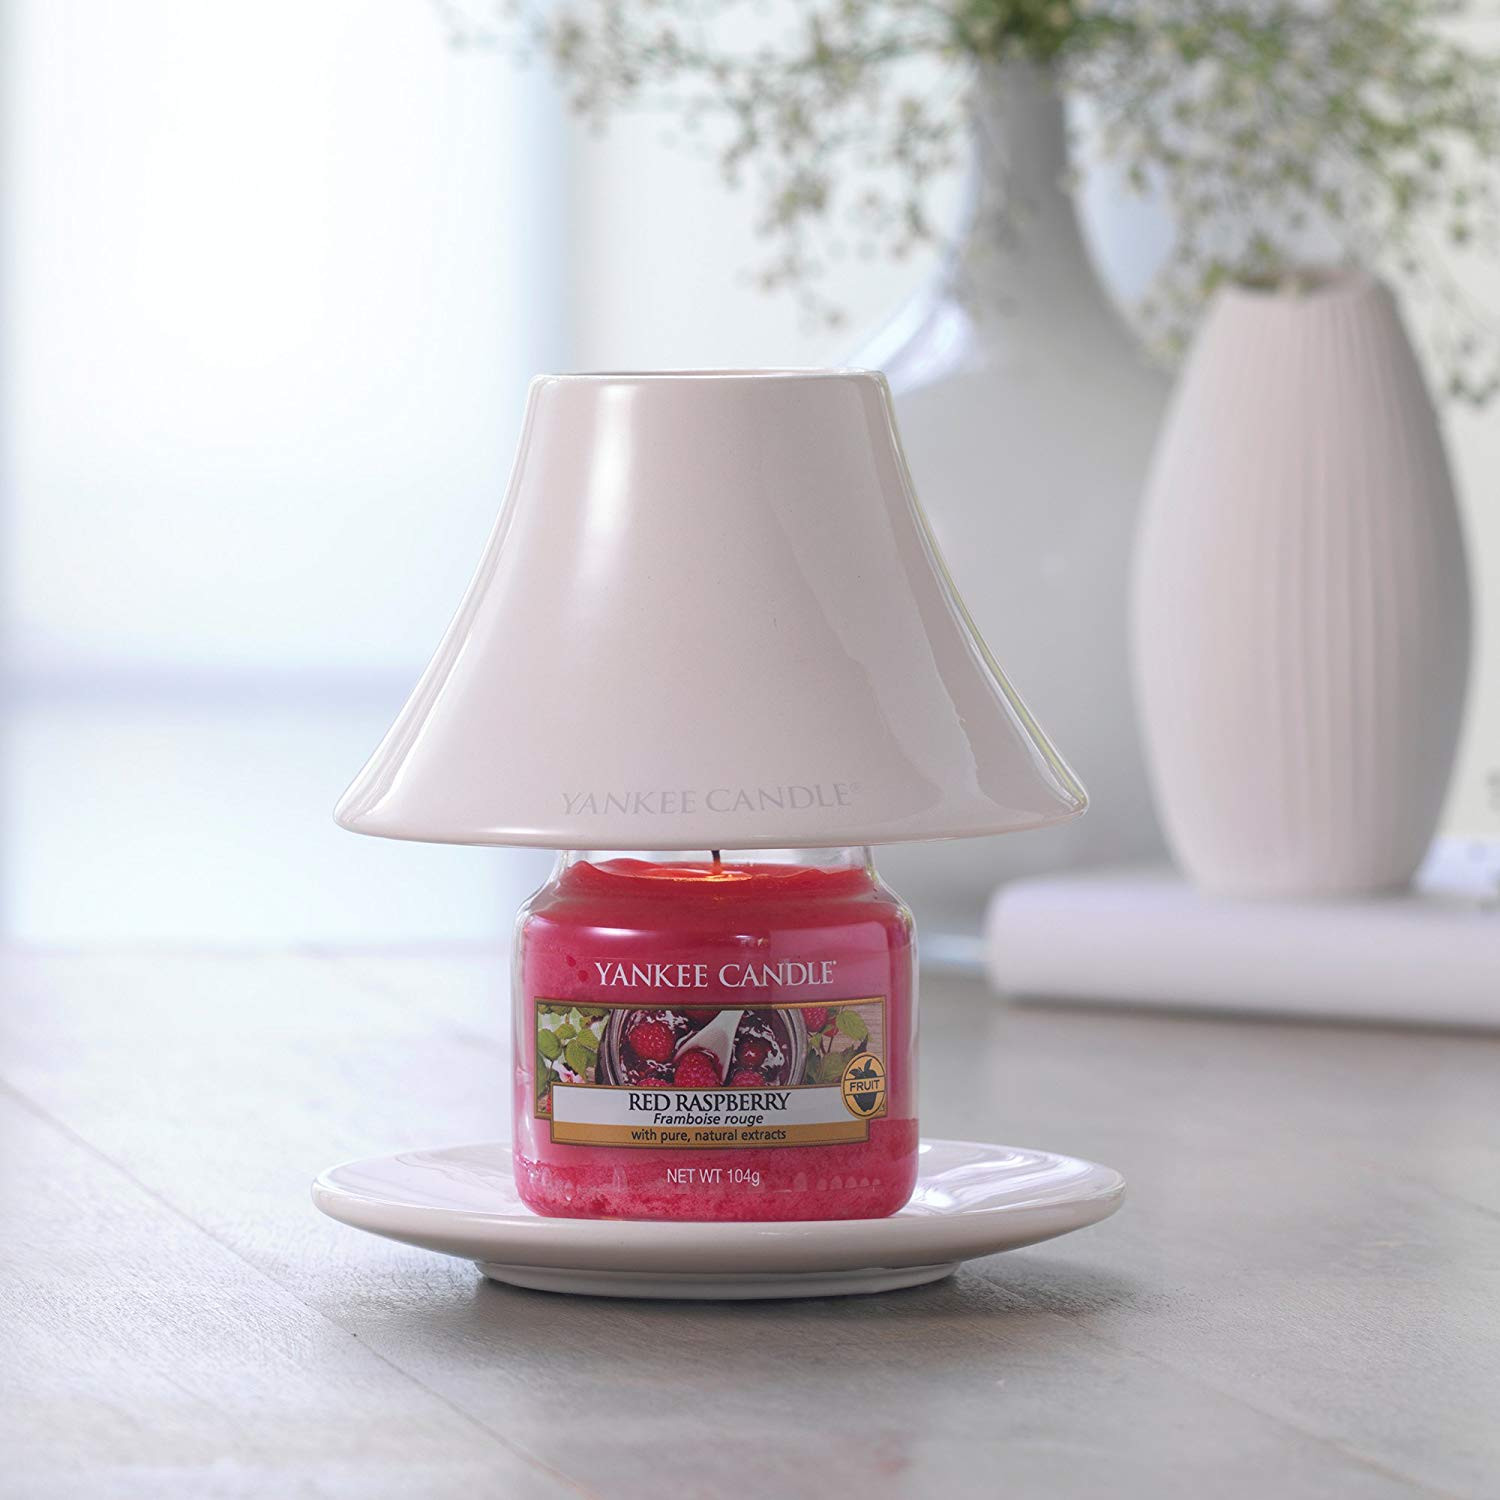 19 attractive Yankee Candle Vase 2024 free download yankee candle vase of yankee candle small jar candle red raspberry amazon co uk kitchen inside yankee candle small jar candle red raspberry amazon co uk kitchen home